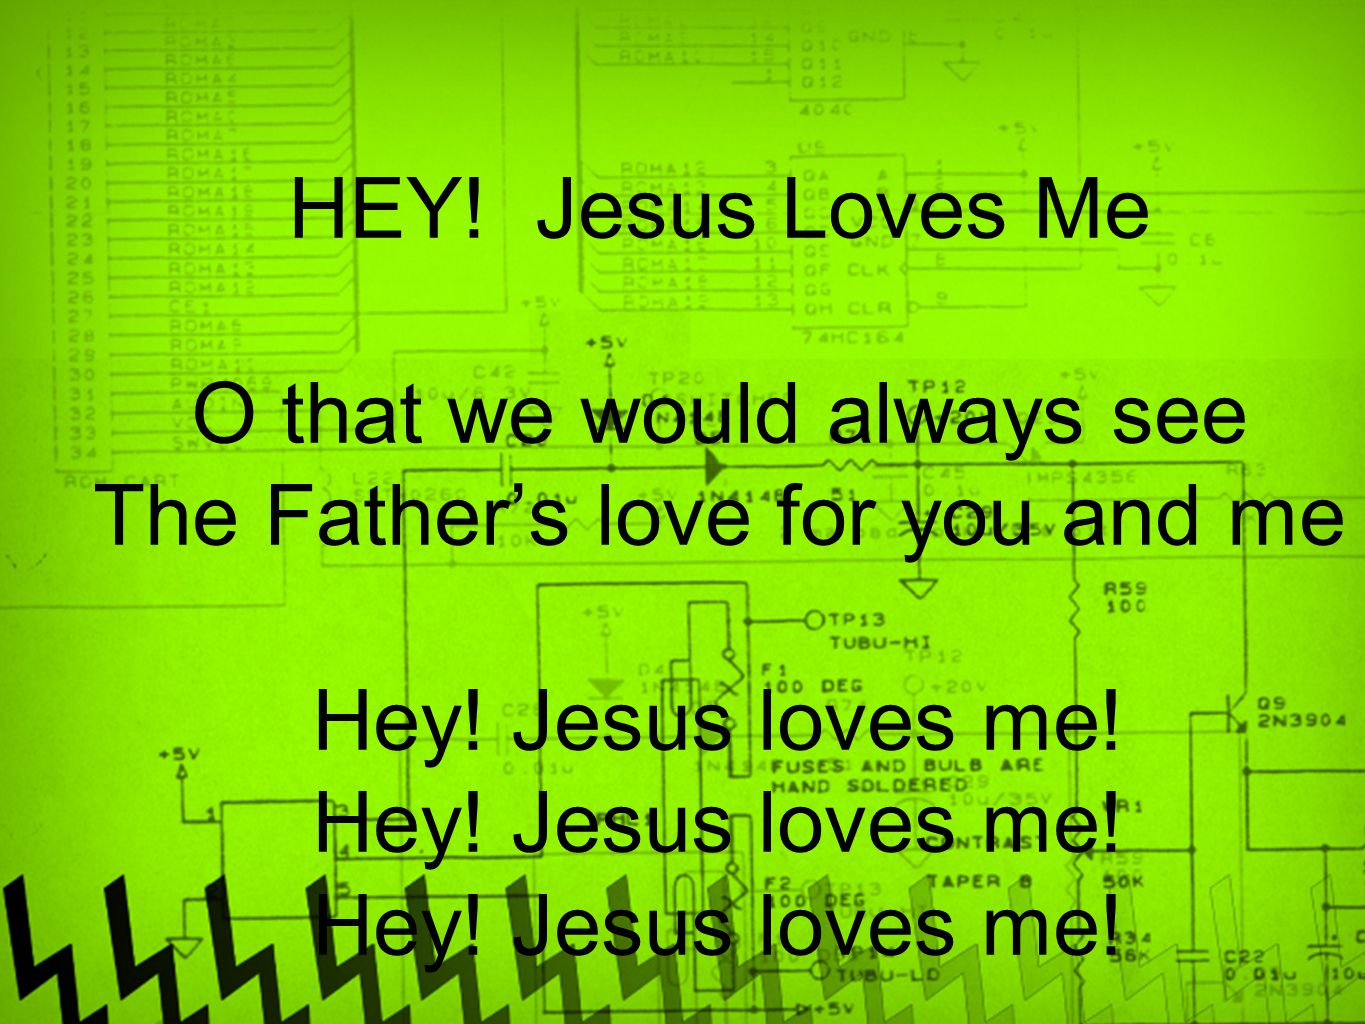 O that we would always see The Father’s love for you and me